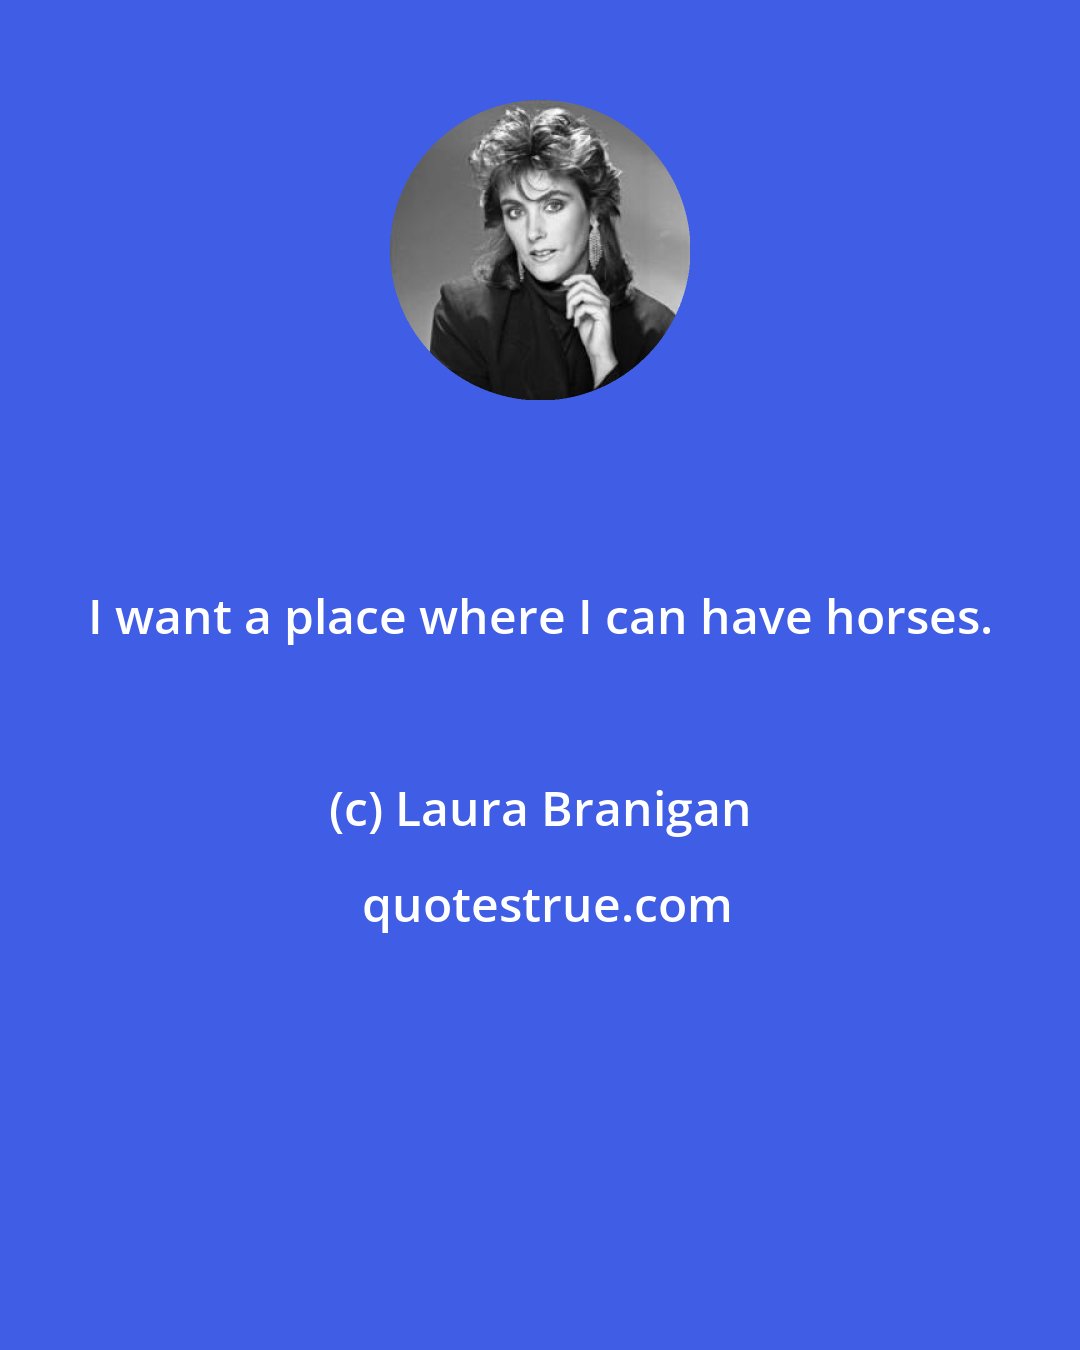 Laura Branigan: I want a place where I can have horses.